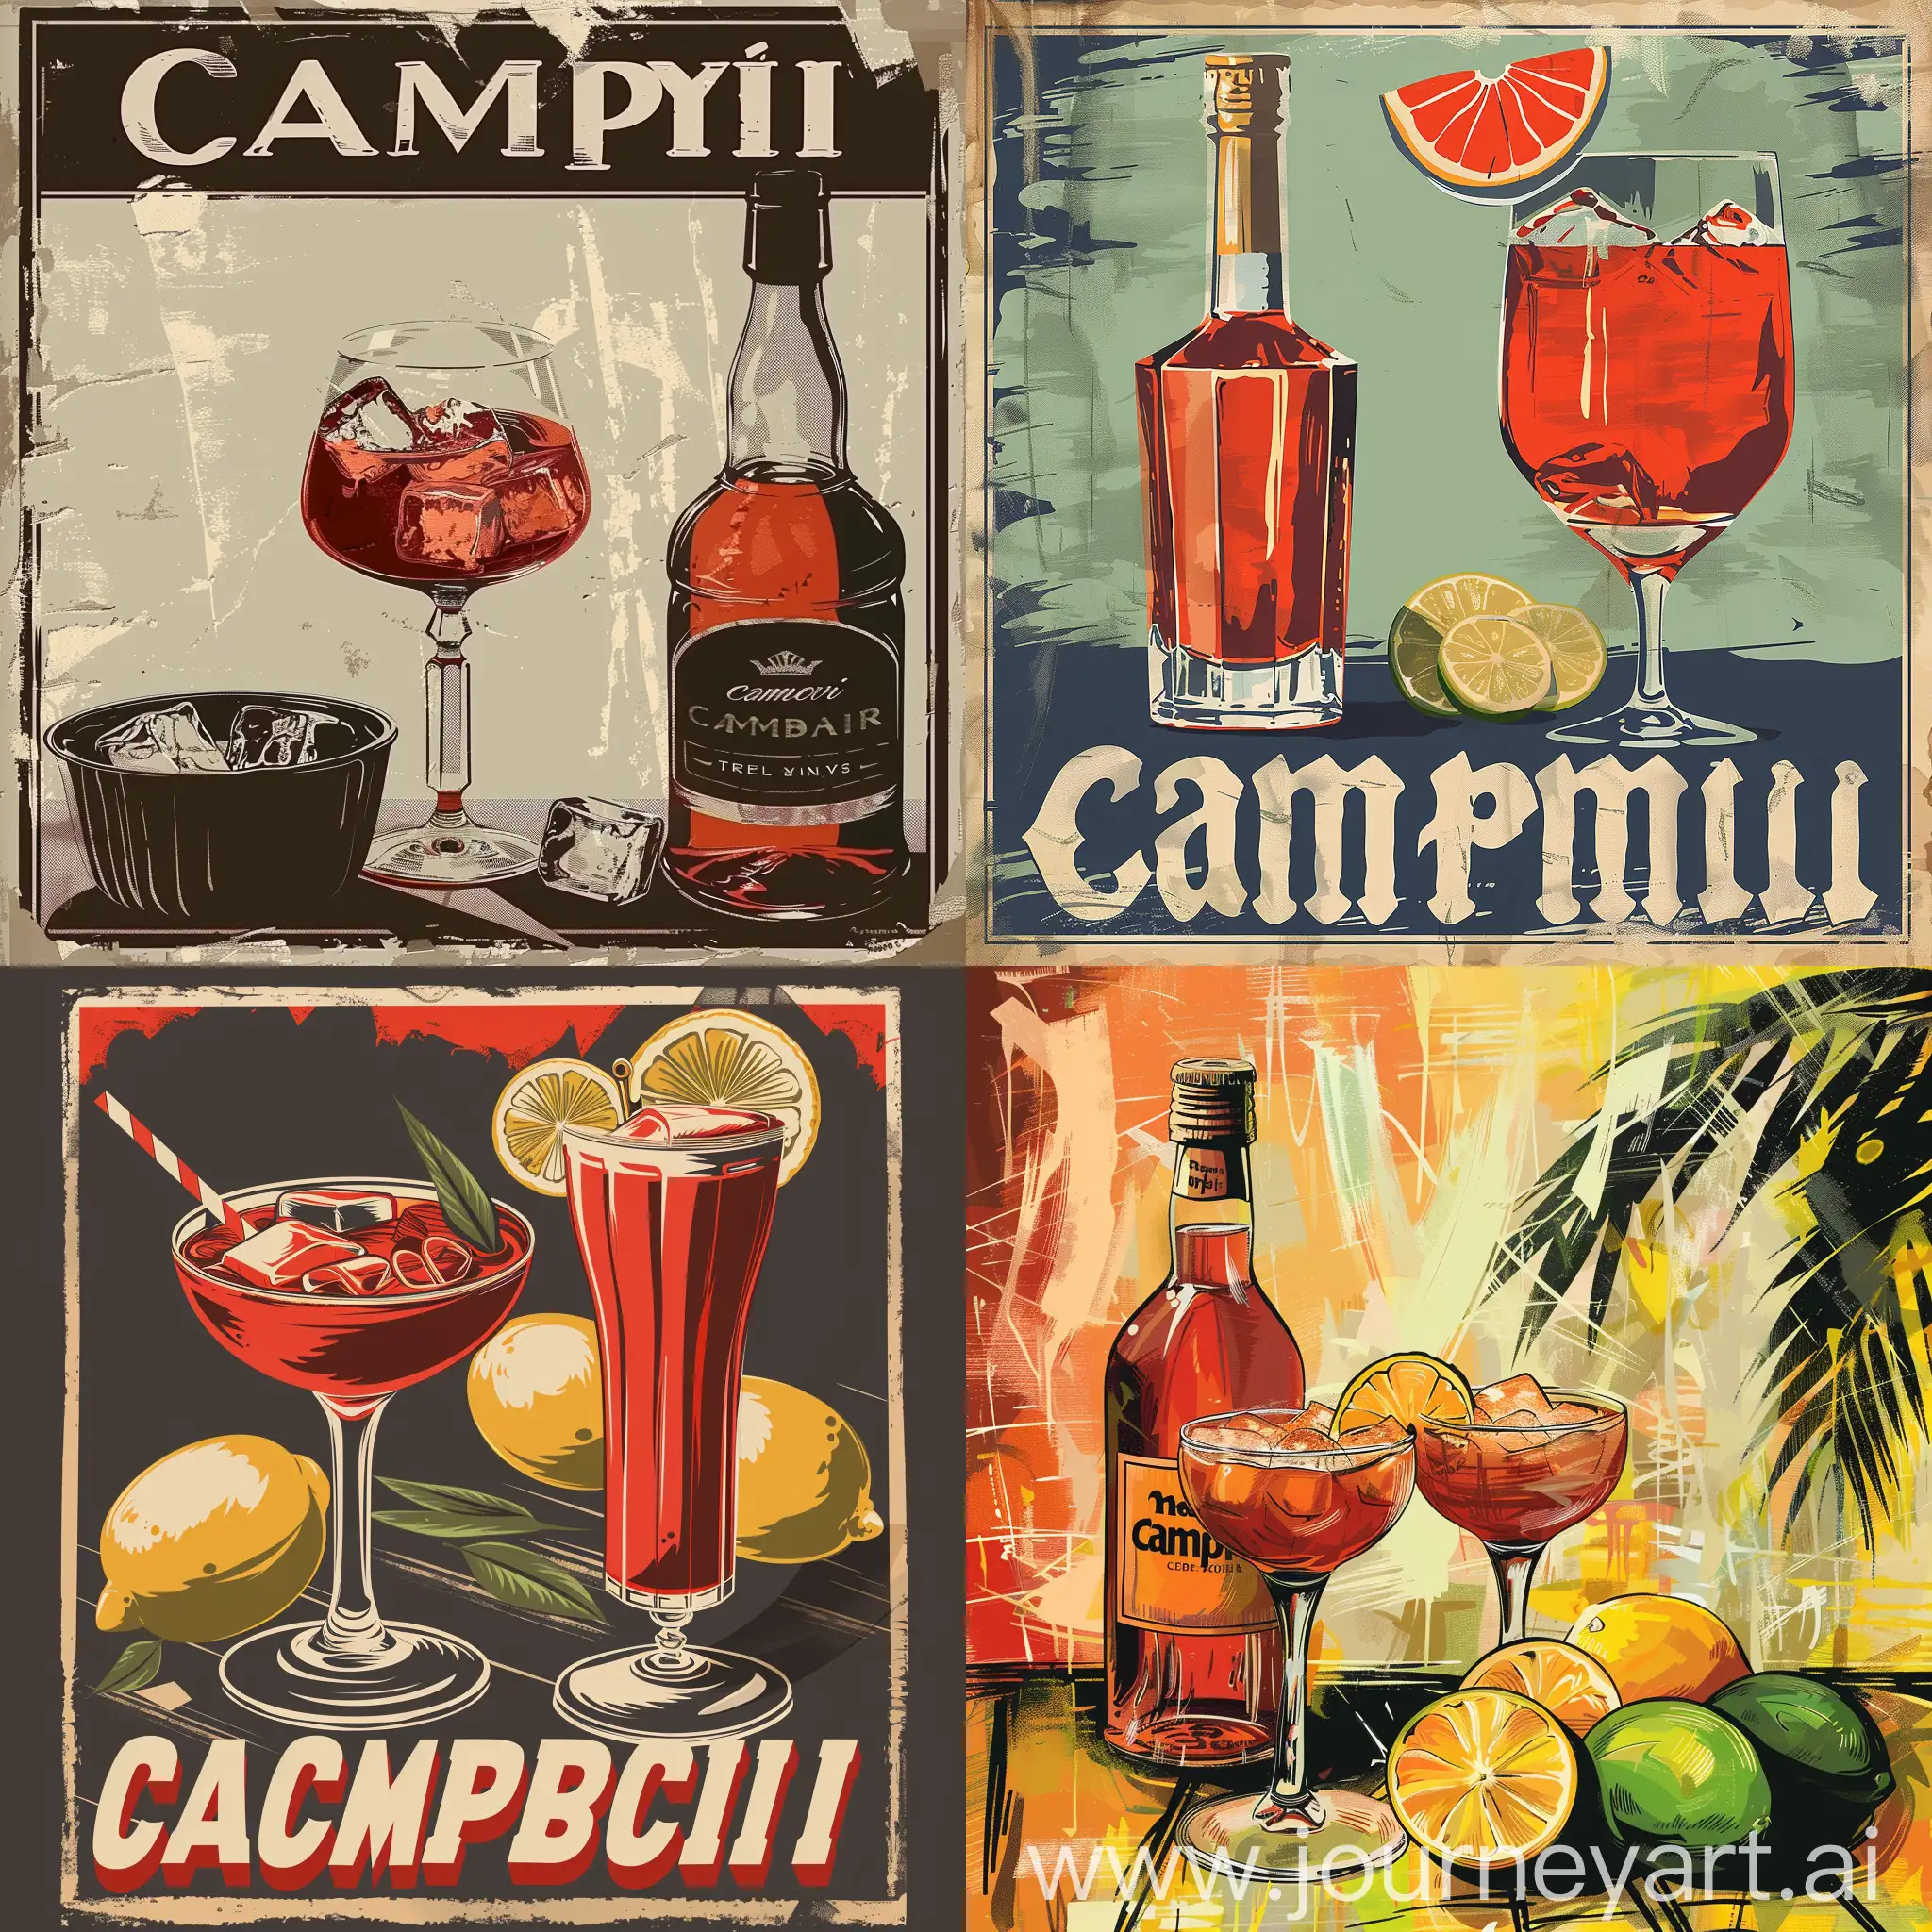 The most Campari style poster